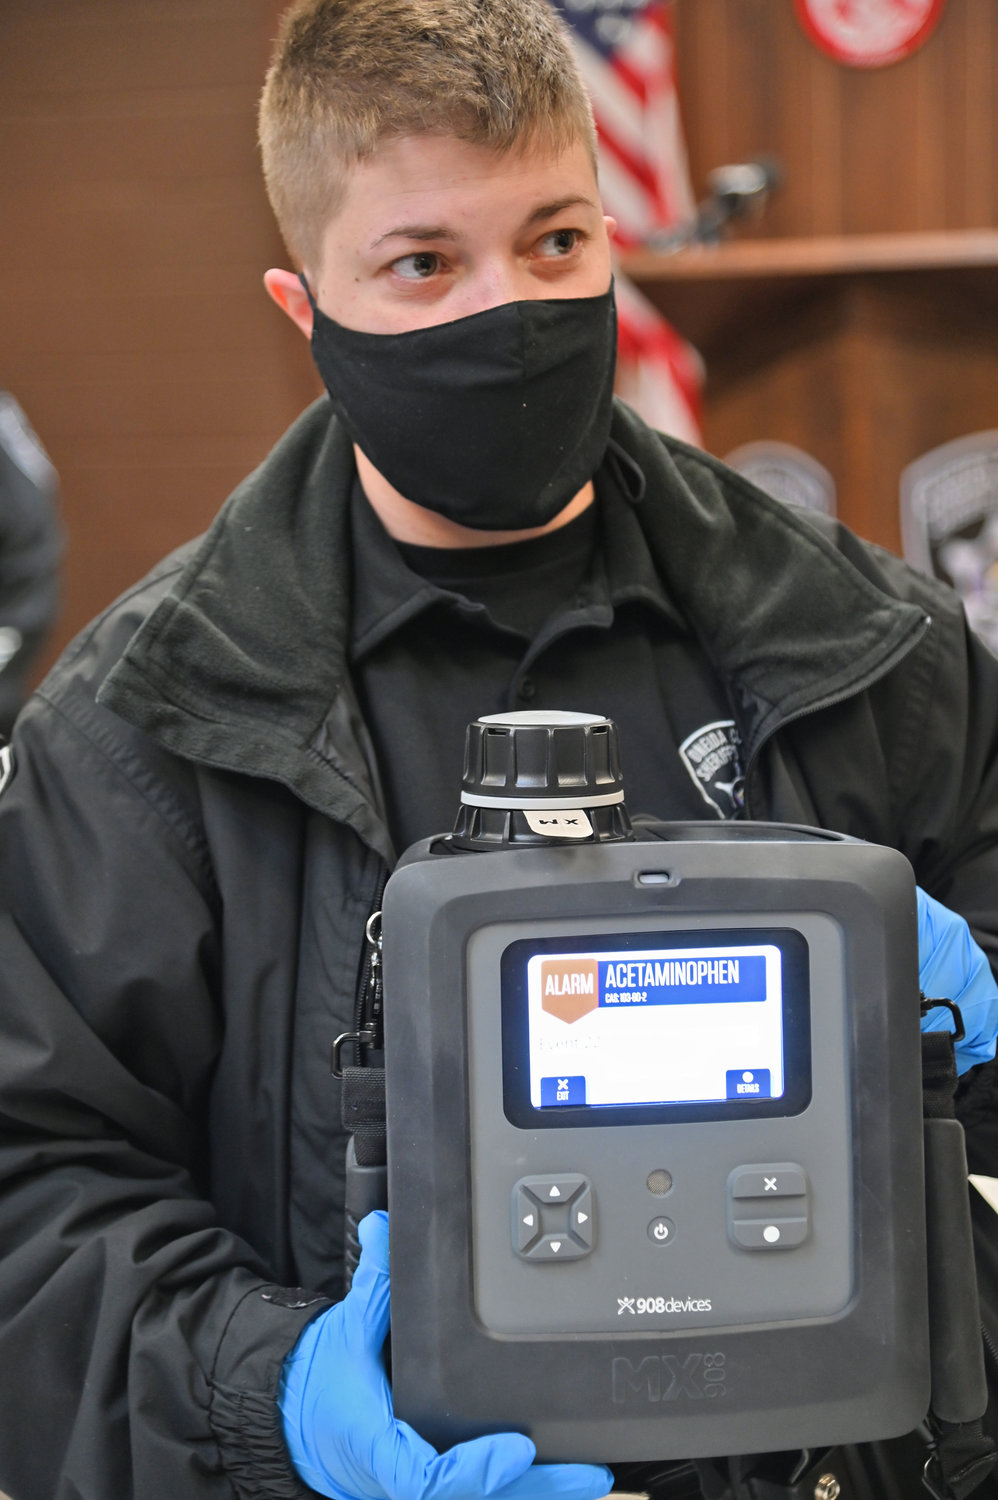 PORTABLE DRUG DETECTION — The screen on the MX908 drug detection device will not only display the type of drug but also has a readable database full of drug information and safety precautions.